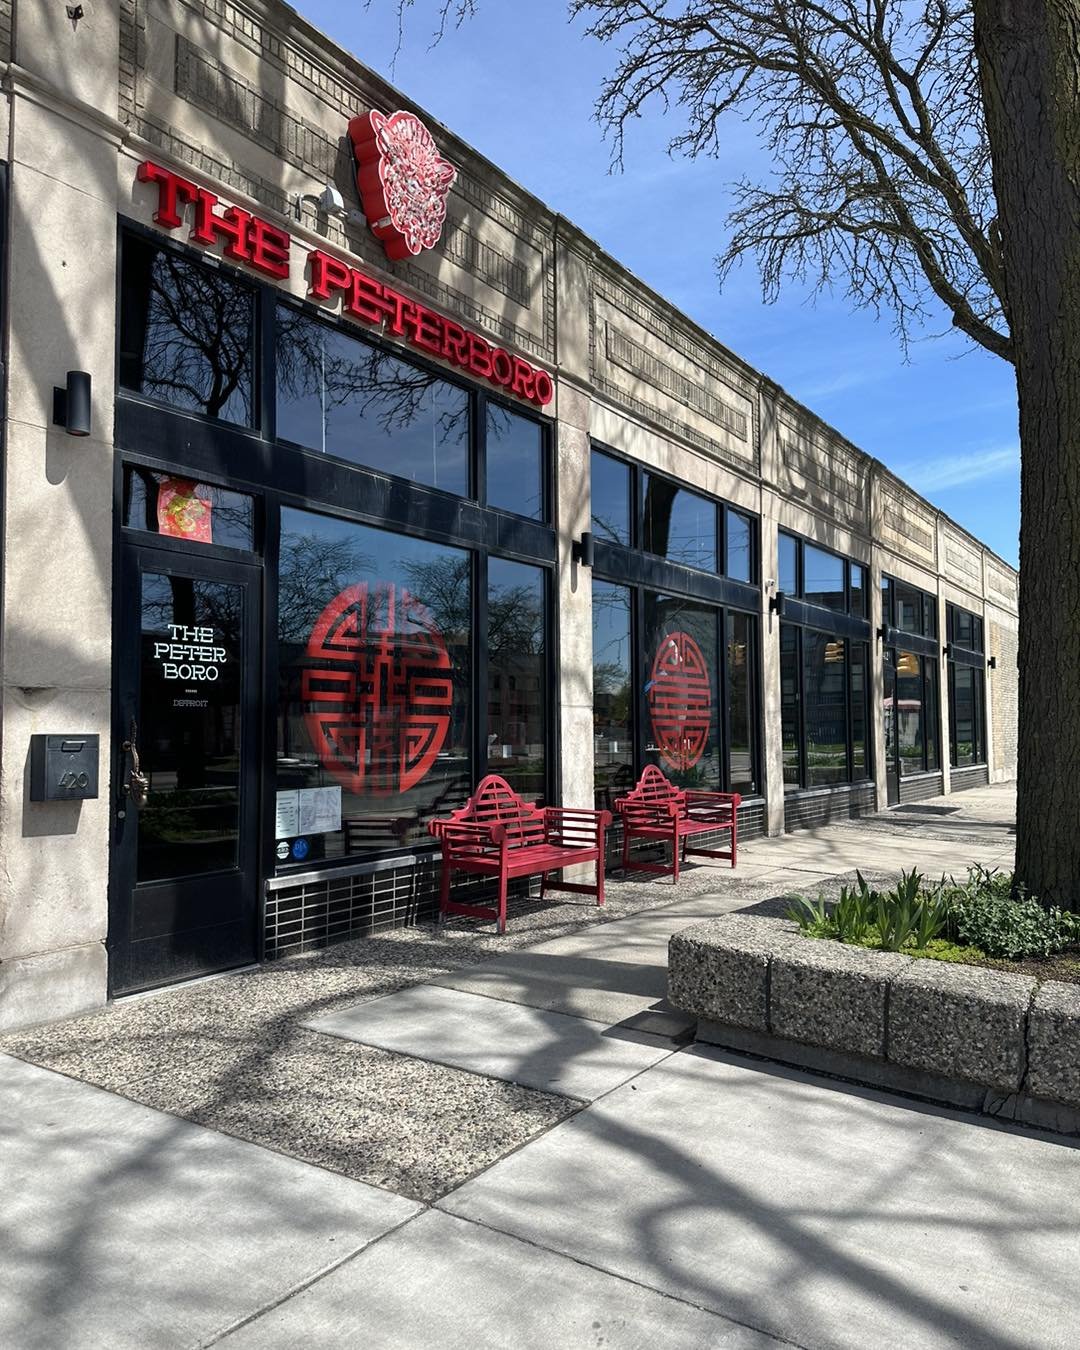 ☀️ It's a beautiful day in the neighborhood! Swing by, treat yourself and we&rsquo;ll take care of the rest!

#ThePeterboro #Detroit #midtowndetroit #detroitchinatown #casscorridor